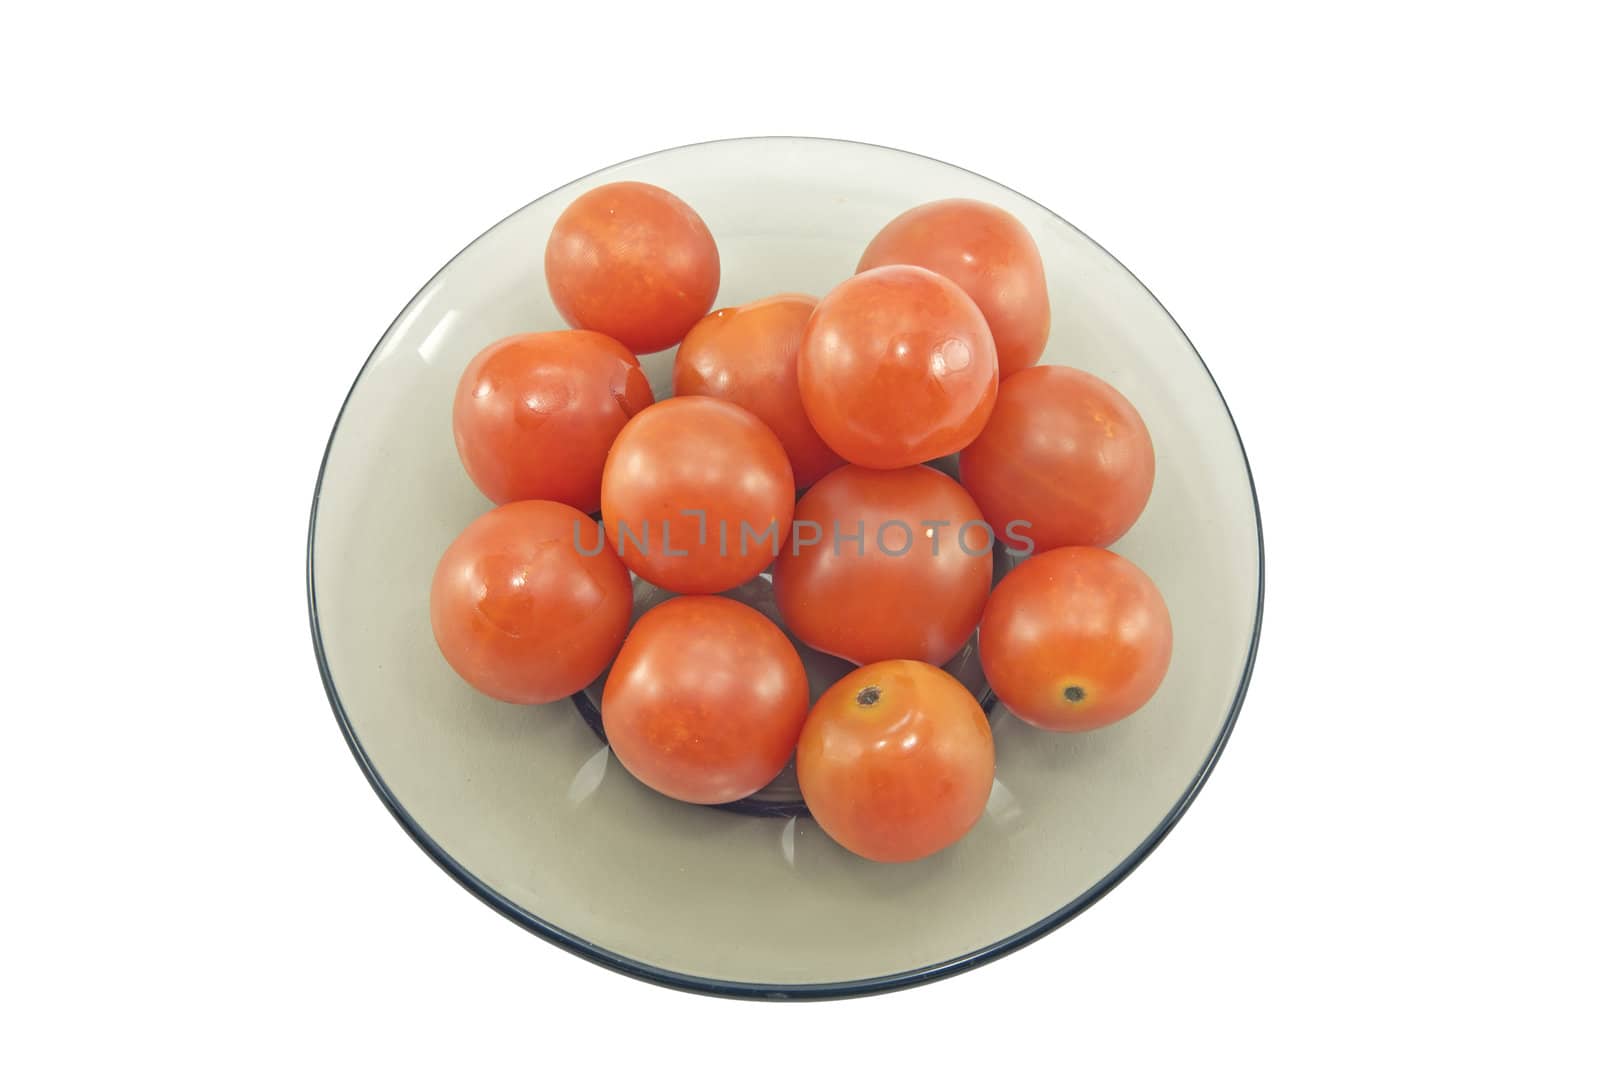 Ripe tomatoes on a glass plate